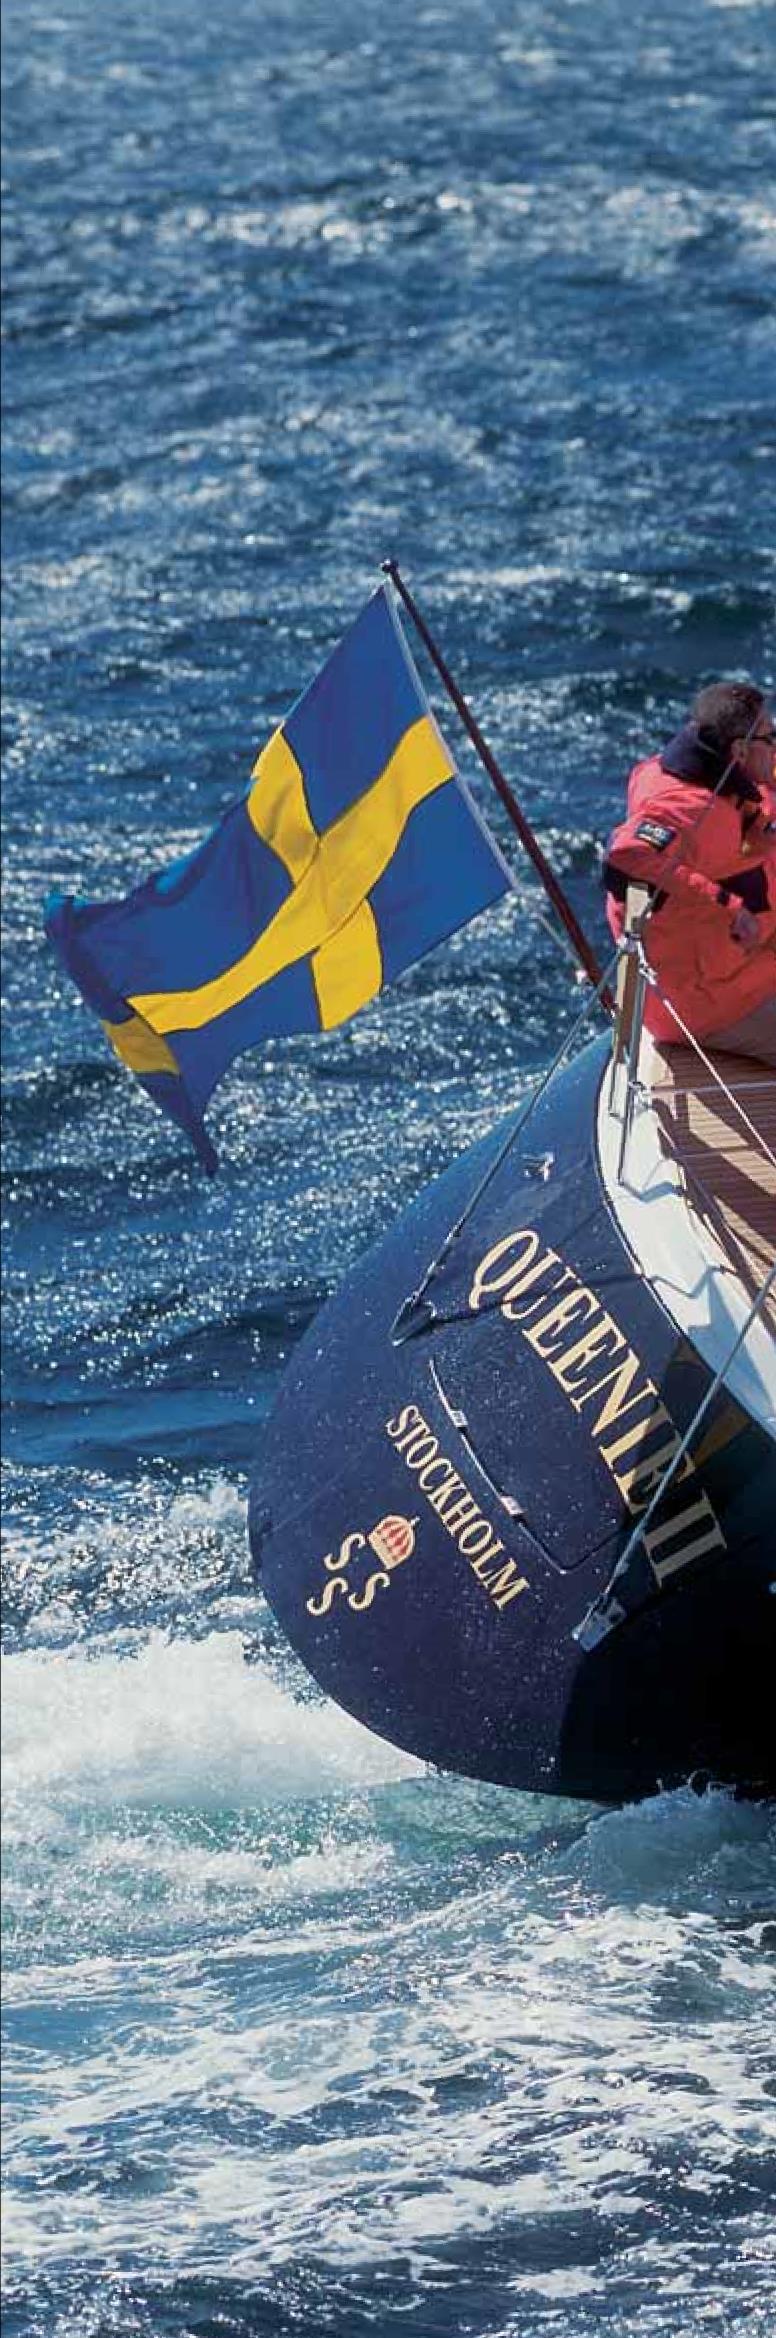 A dream to steer It is hard to let go. Once you have taken the helm and set out on your first cruise in a Sweden Yachts 45, you will feel that your dreams have come true.